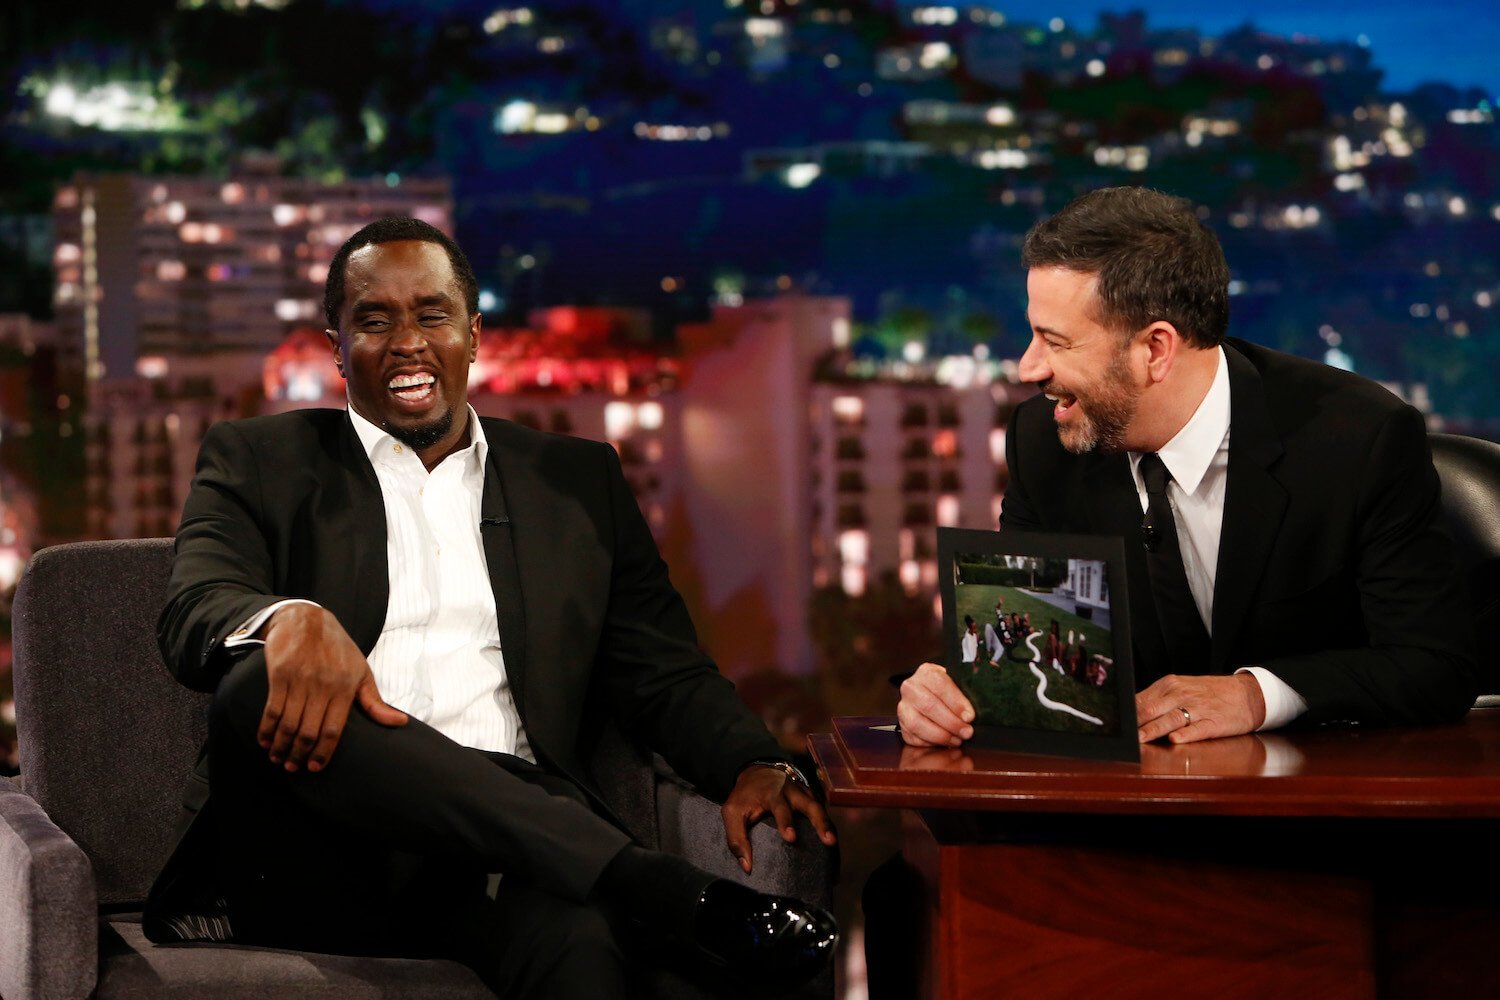 Sean 'P. Diddy' Combs laughing next to Jimmy Kimmel on 'Jimmy Kimmel Live!'